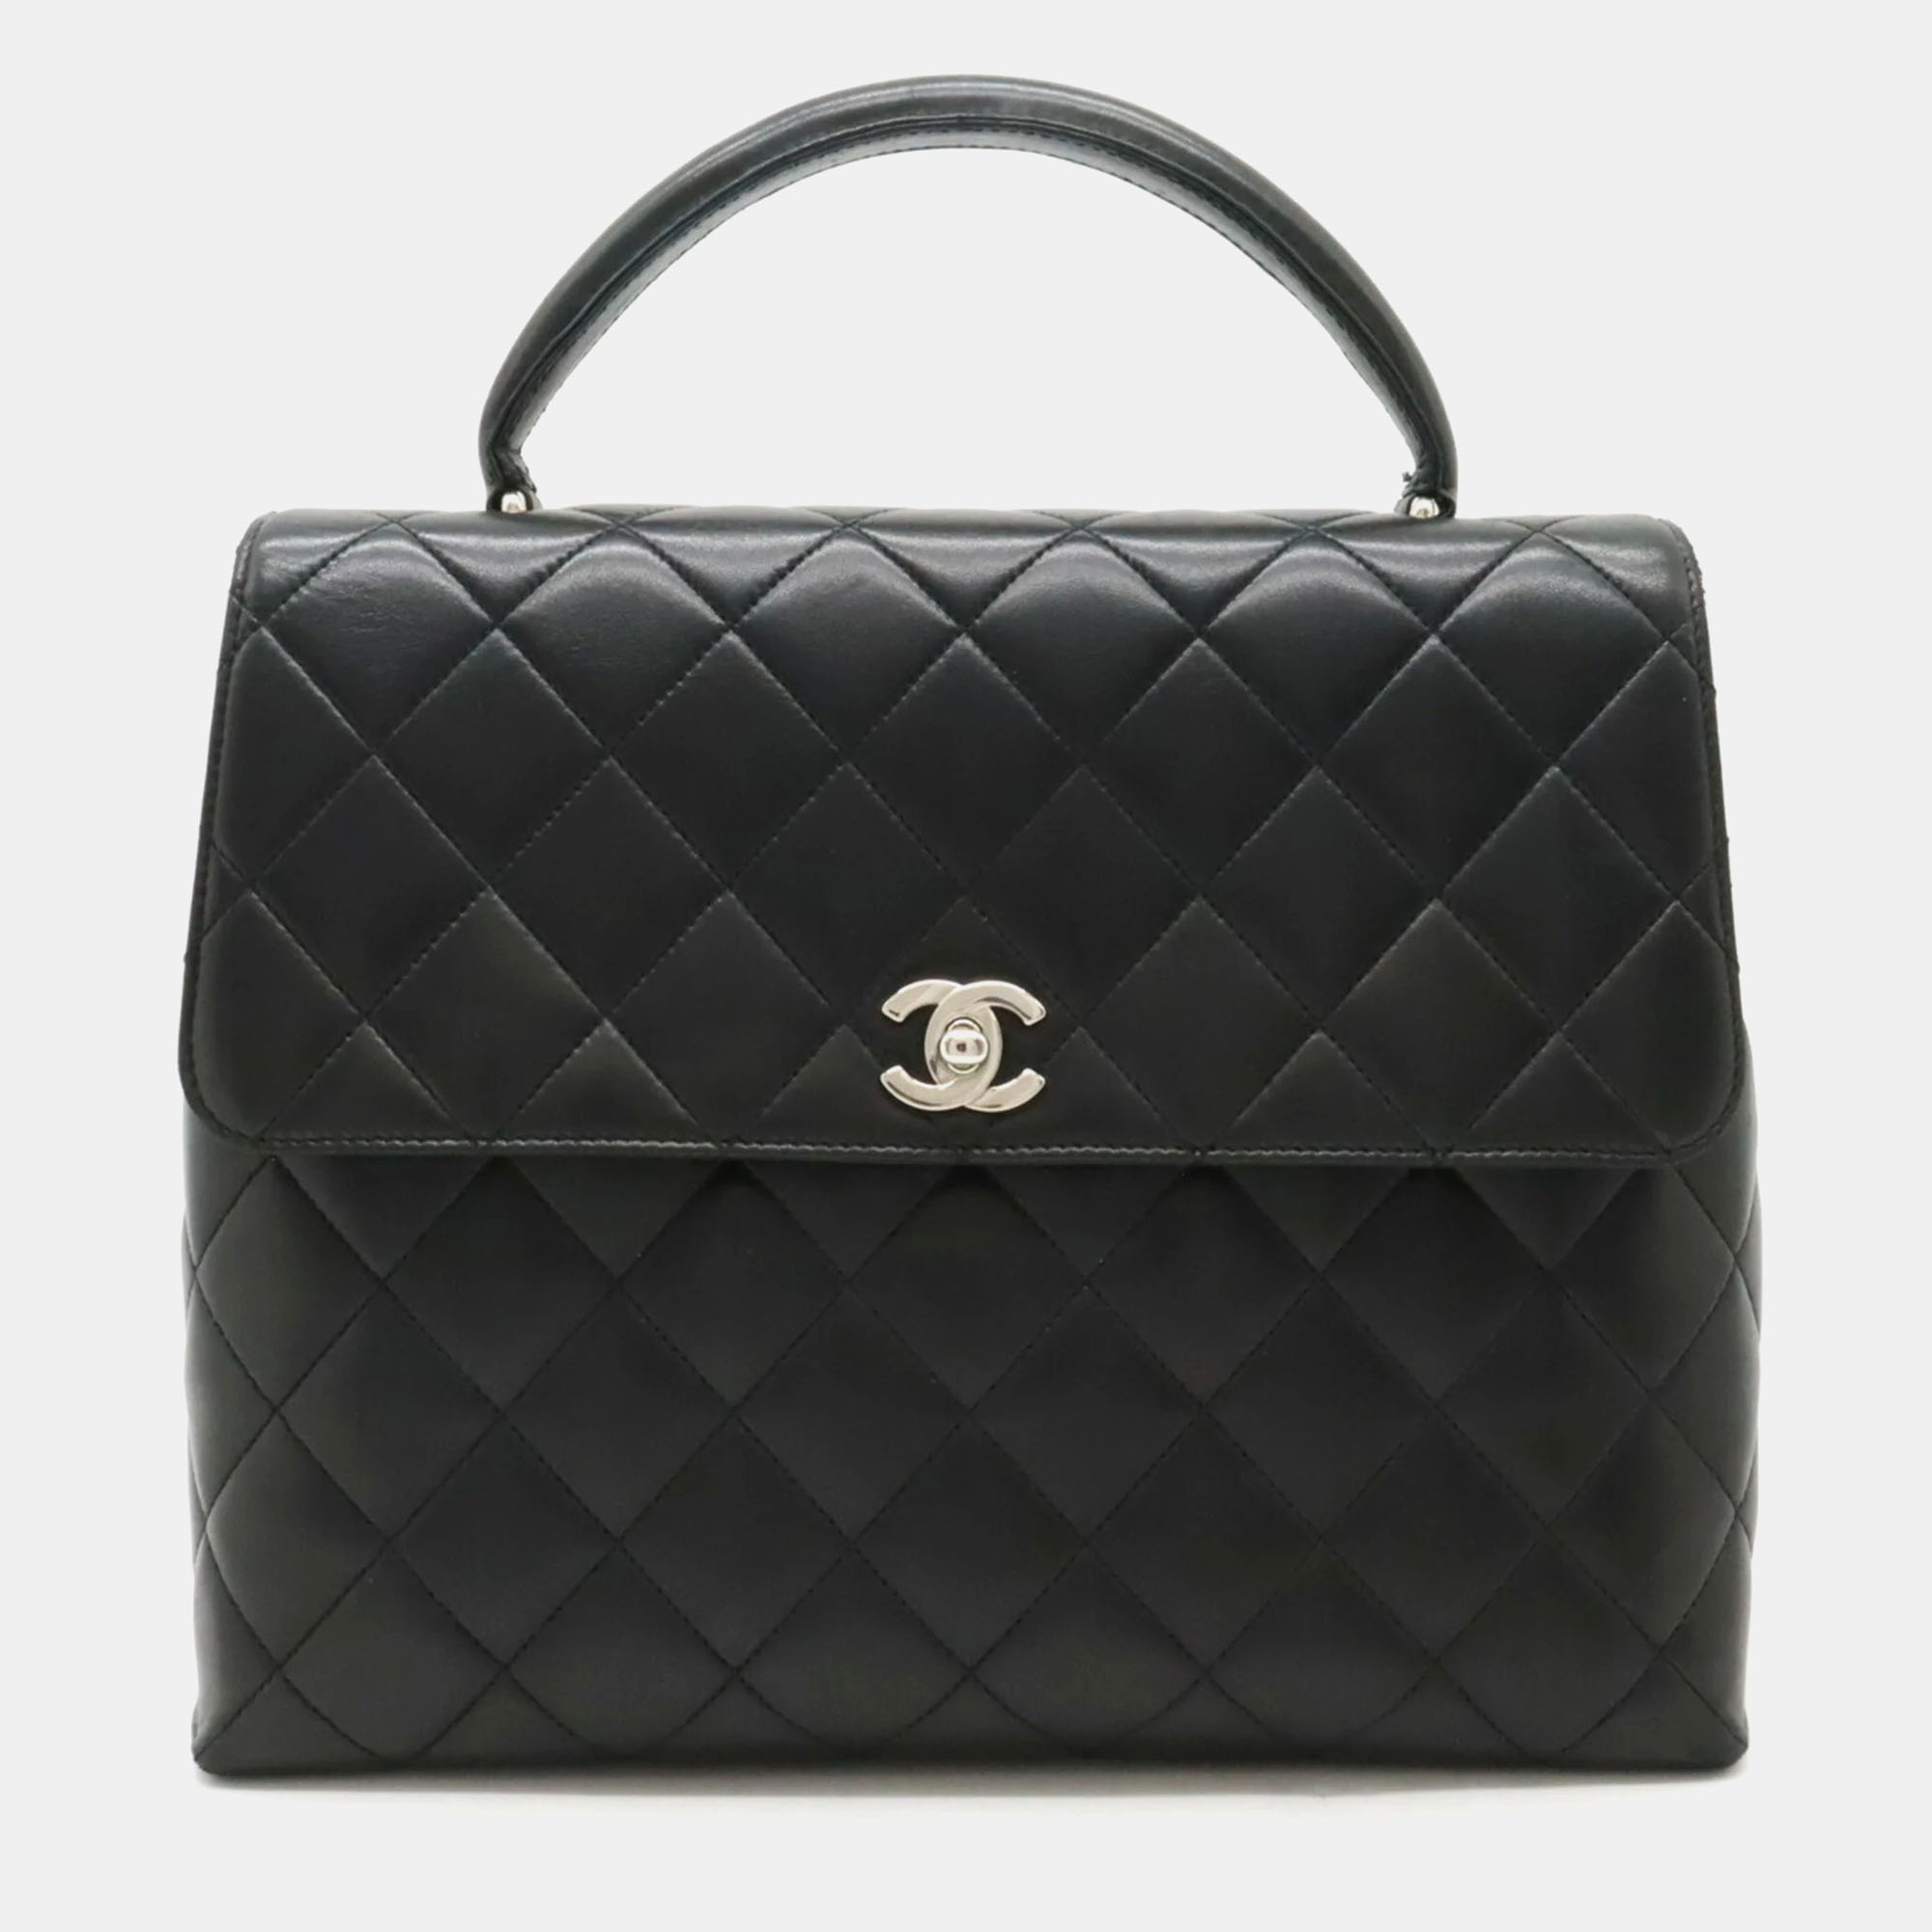 

Chanel Black Lambskin Leather Kelly Top Handle Bags